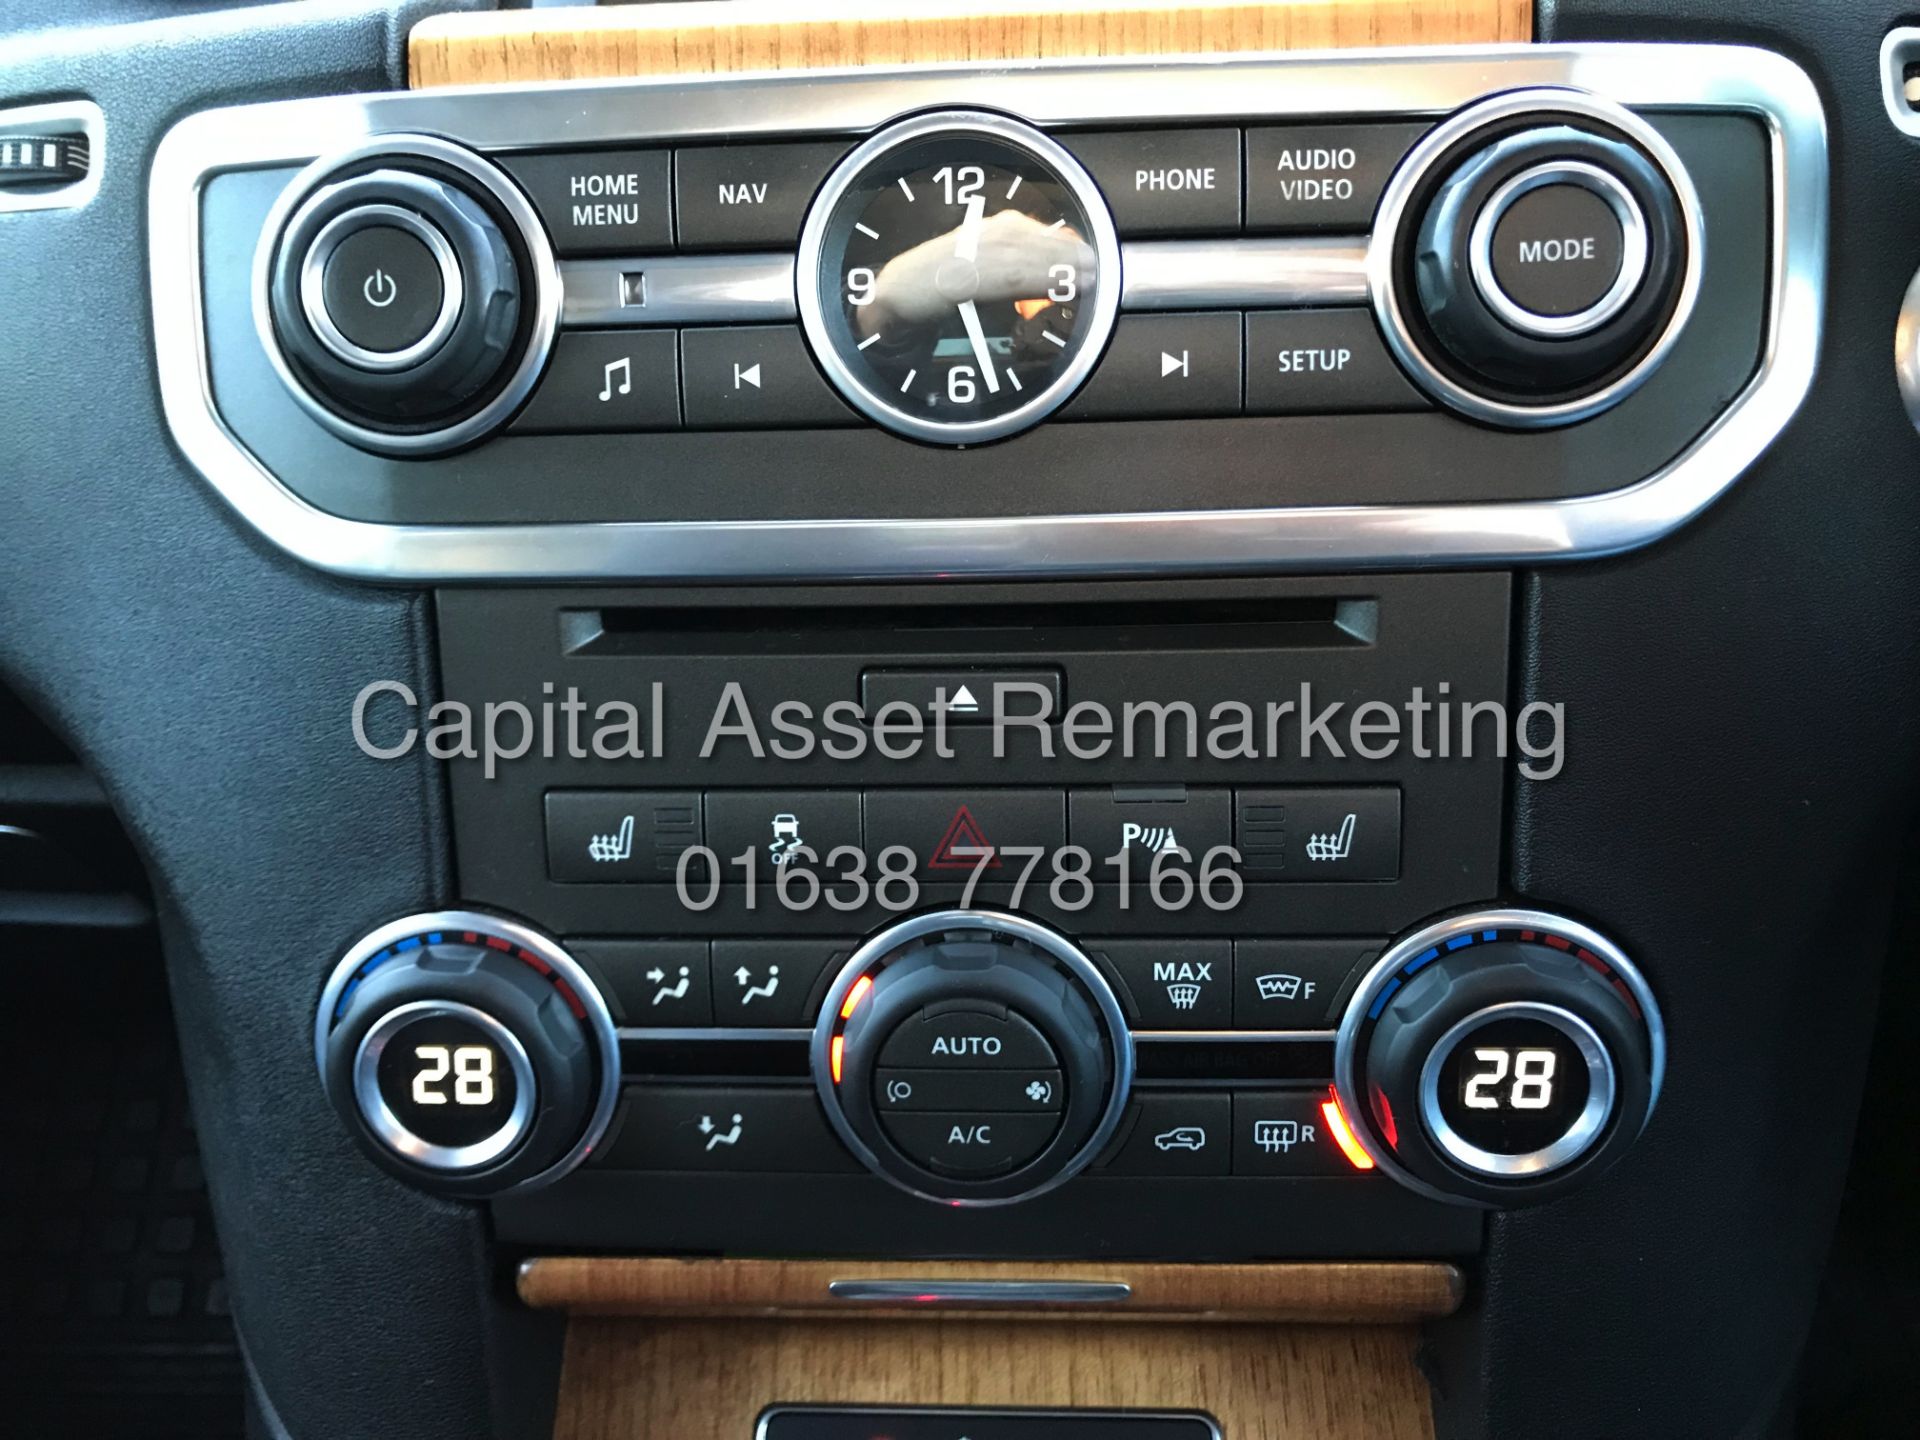 (ON SALE) LAND ROVER DISCOVERY 4 "HSE" 3.0 SDV6 AUTO (13 REG) 7 SEATER - TOP SPEC - SAT NAV -LEATHER - Image 17 of 31